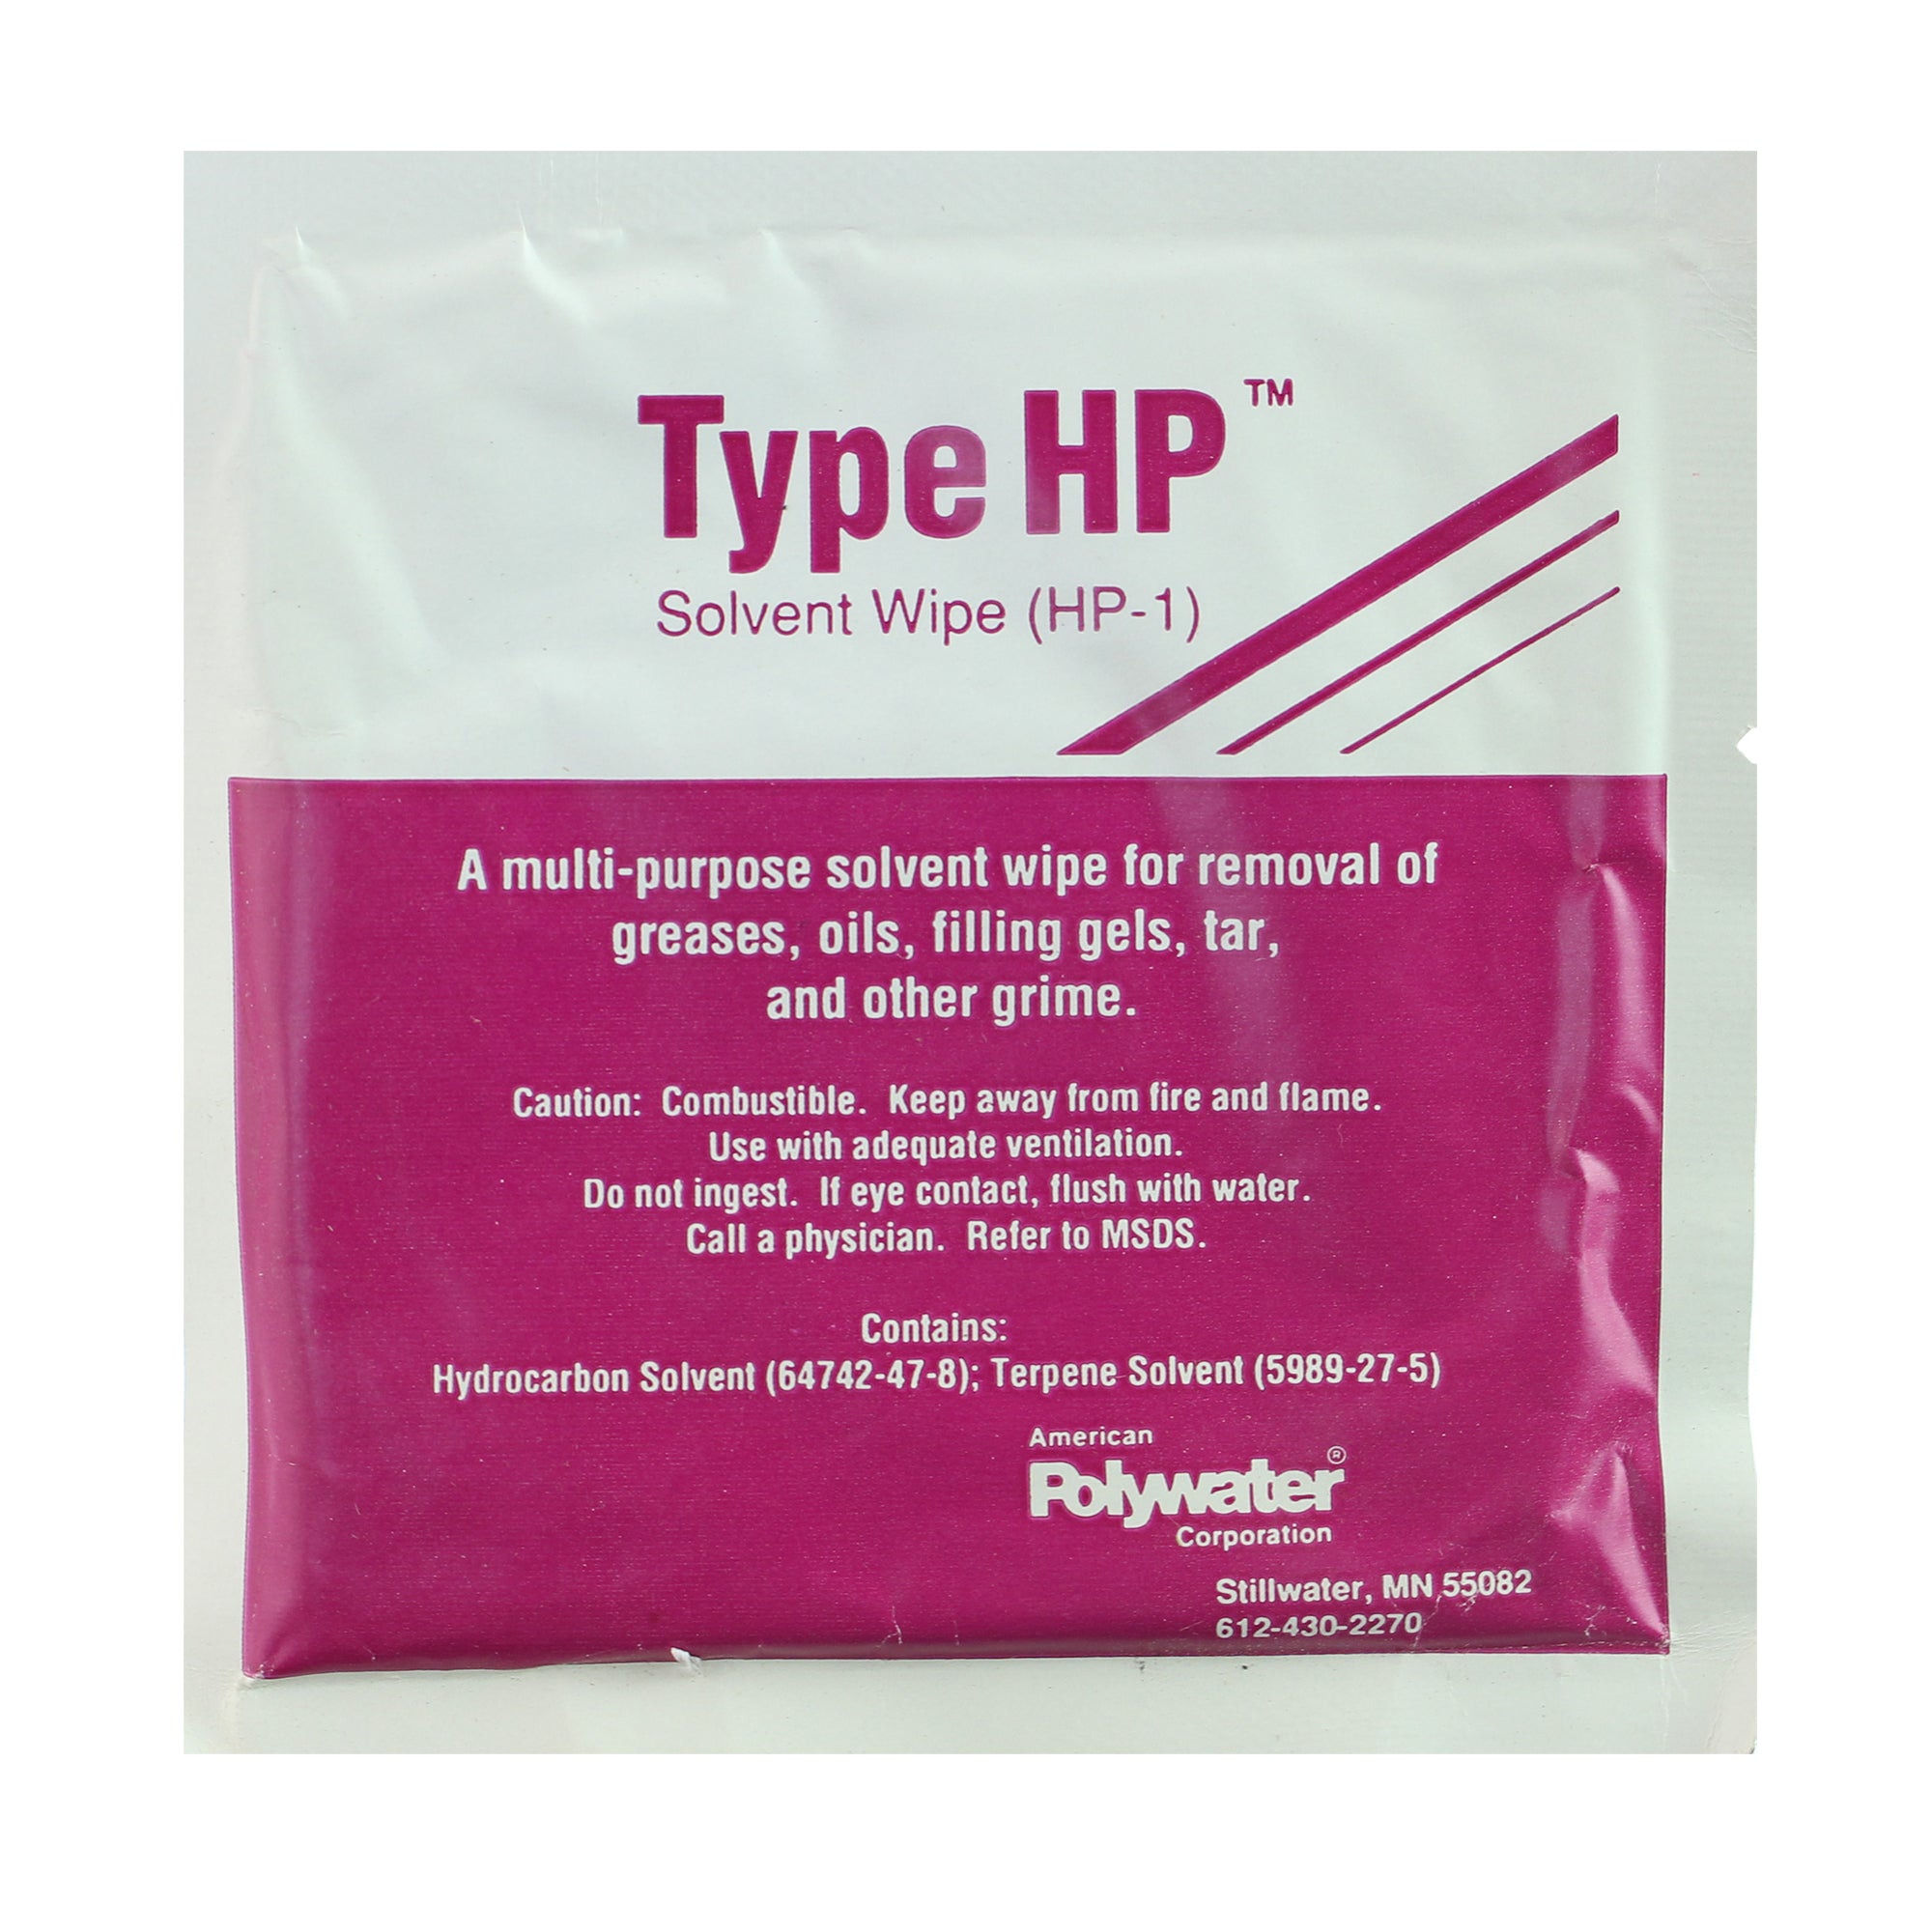 American Polywater Corp., AMERICAN POLYWATER HP-1 SOLVENT WIPE MULTI-PURPOSE CLEANER DEGREASER